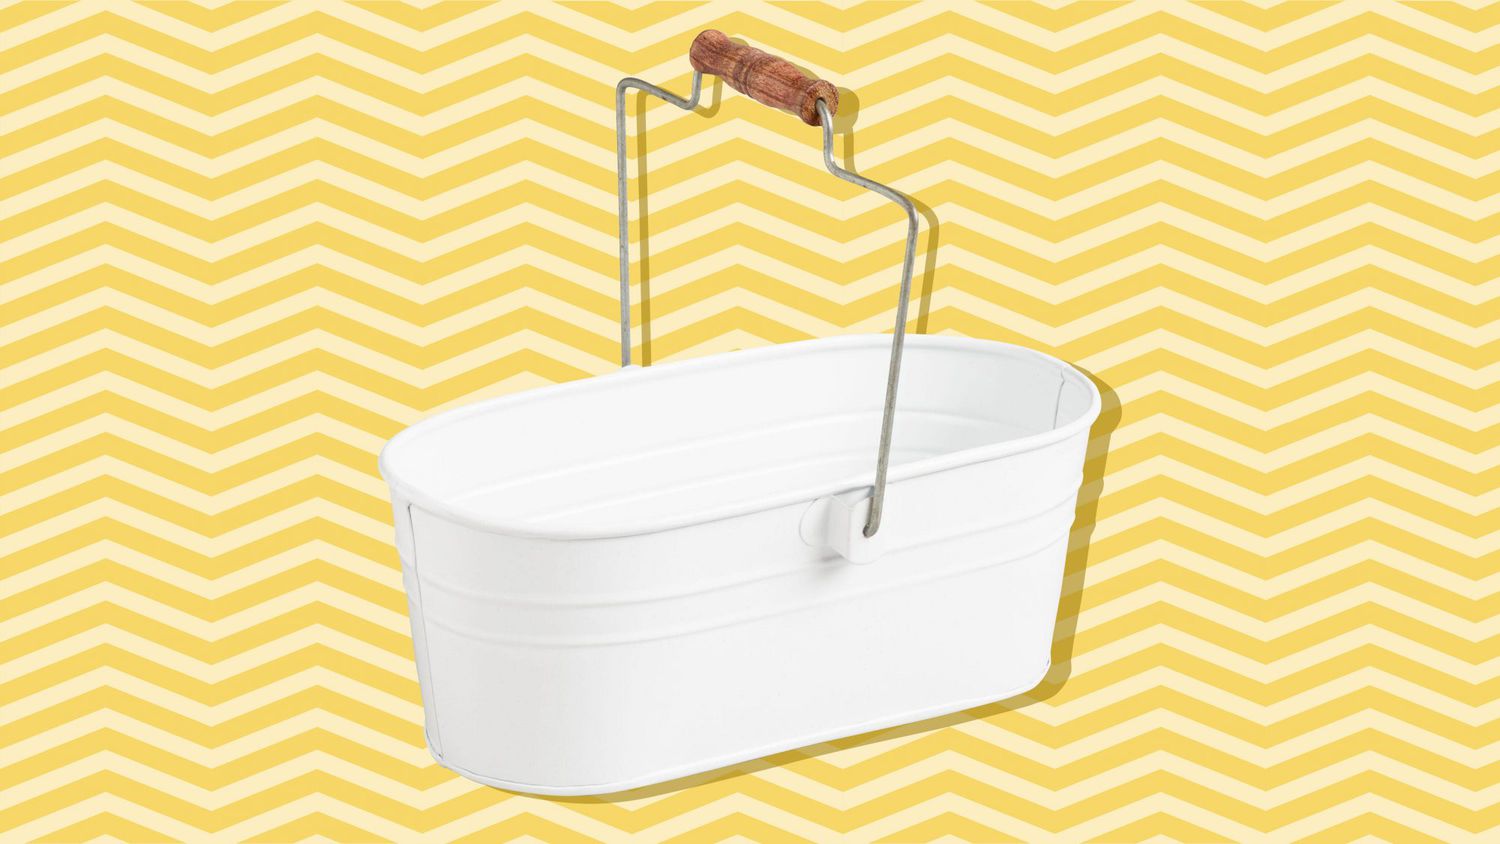 White cleaning caddy with handle